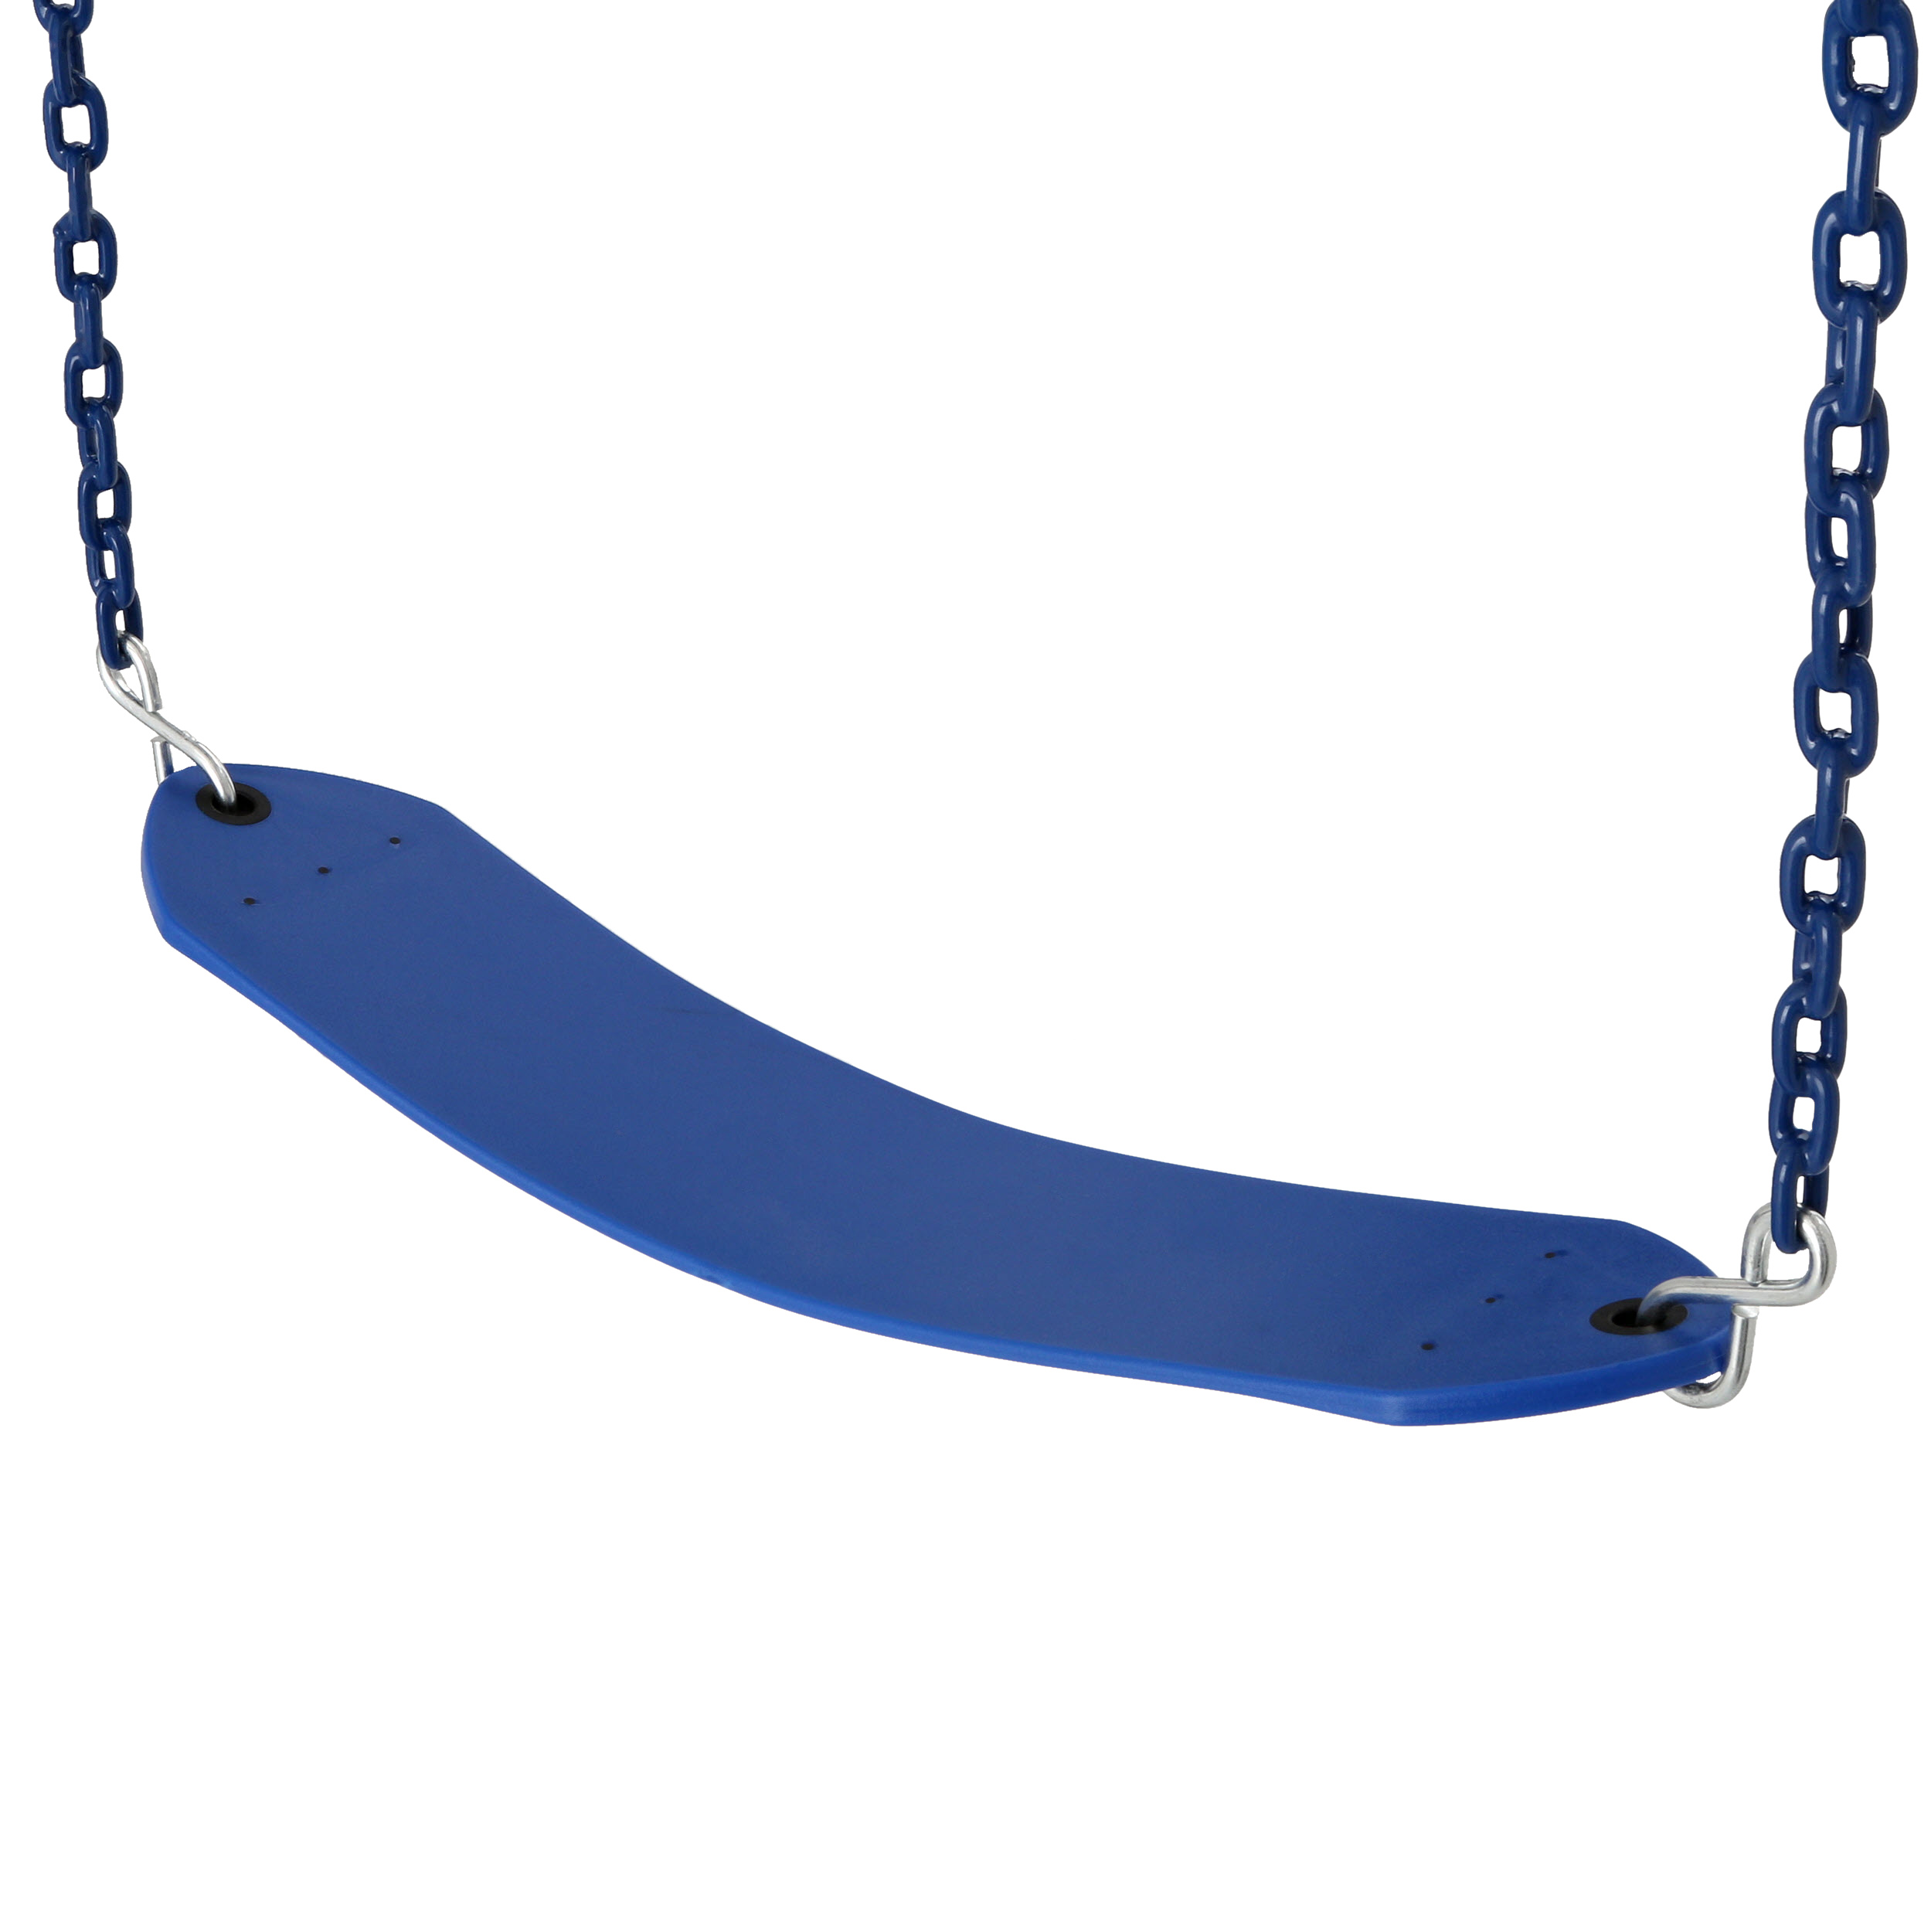 Gorilla Playsets Deluxe Swing Belt - Blue with Blue Chains - image 4 of 5